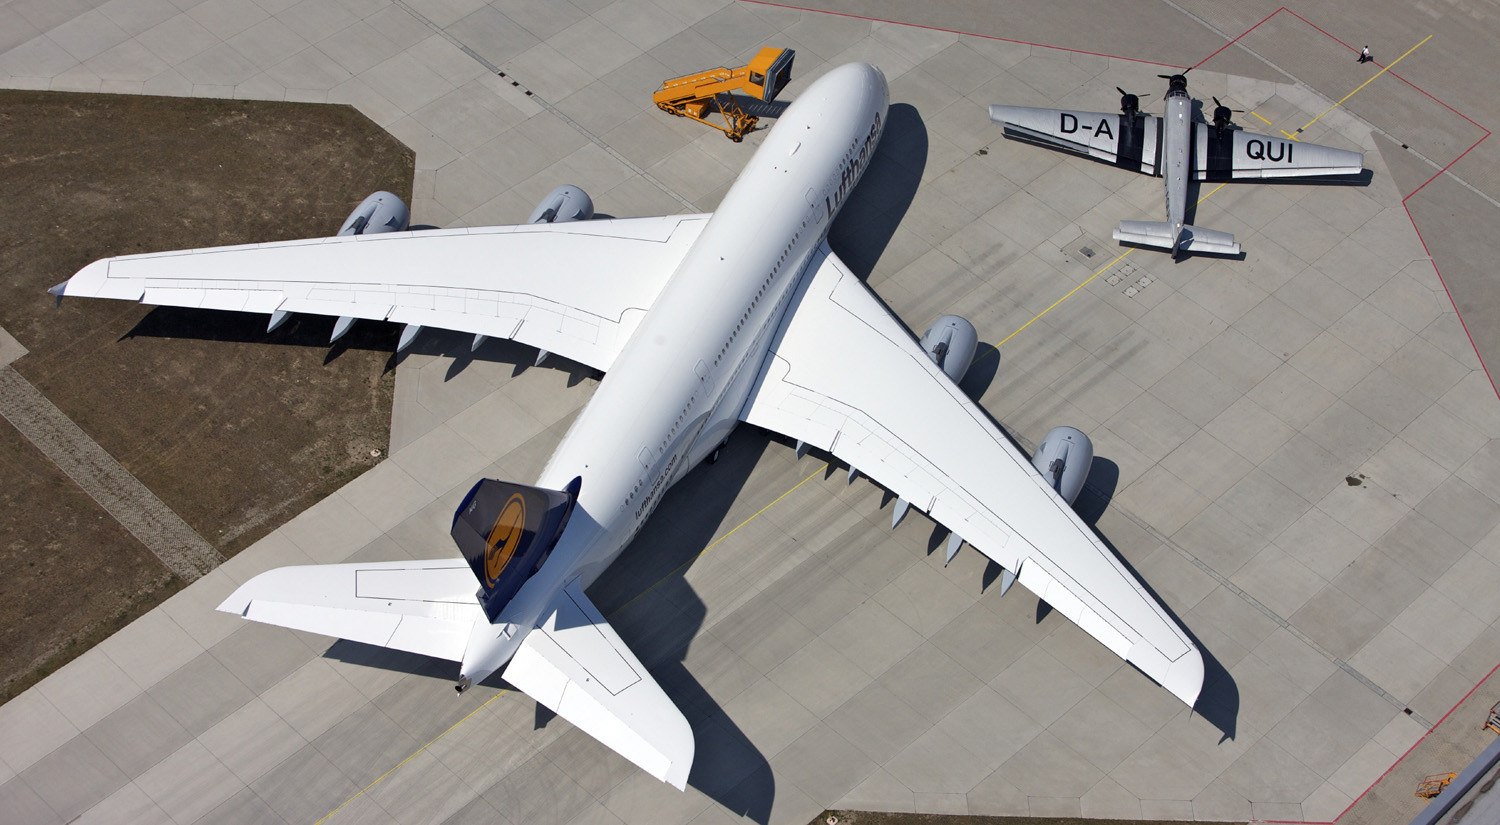 Commercial aviation has changed just a bit. The Ju-52 parked next to an Airbus A380 - Photo: Lufthansa